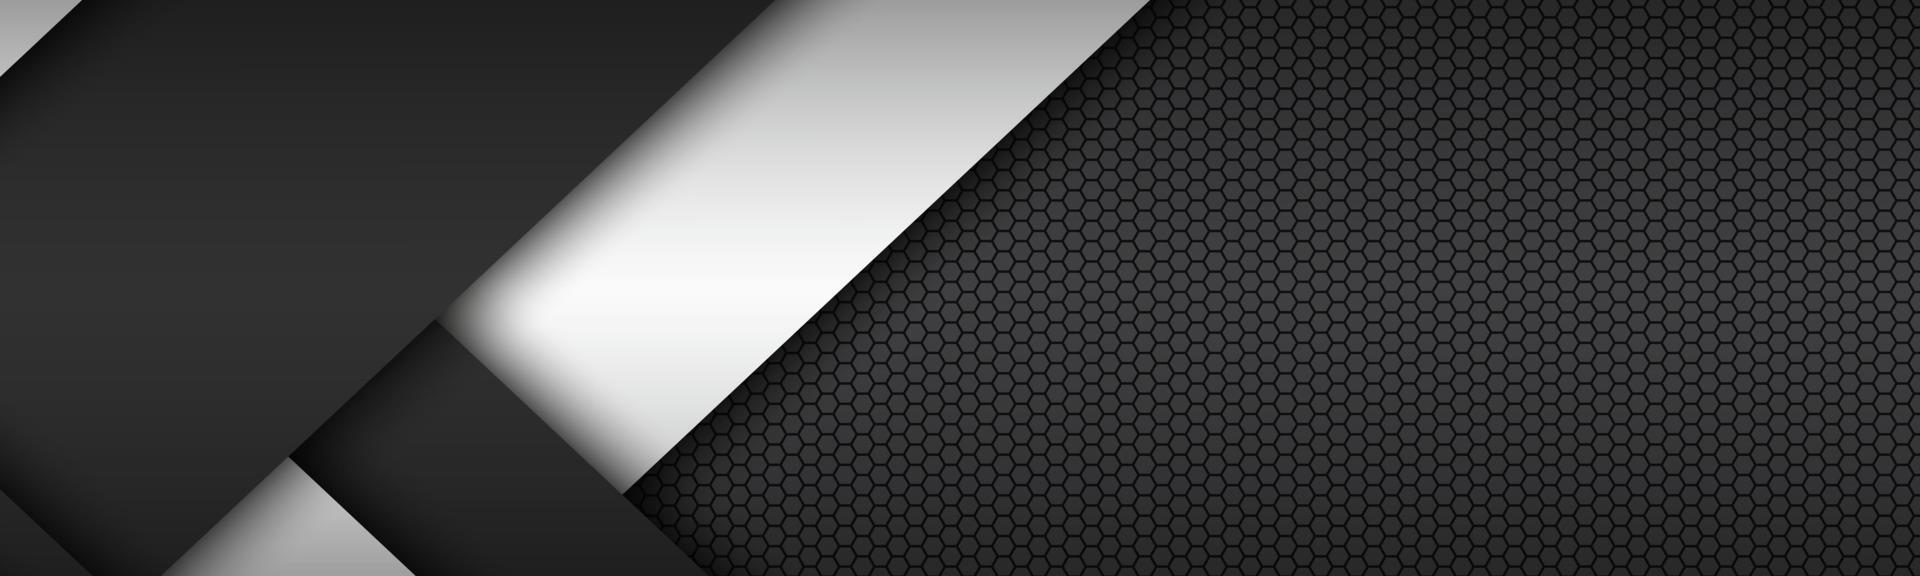 Black and white layers above each other header Modern material design with a hexagonal pattern Vector abstract widescreen banner